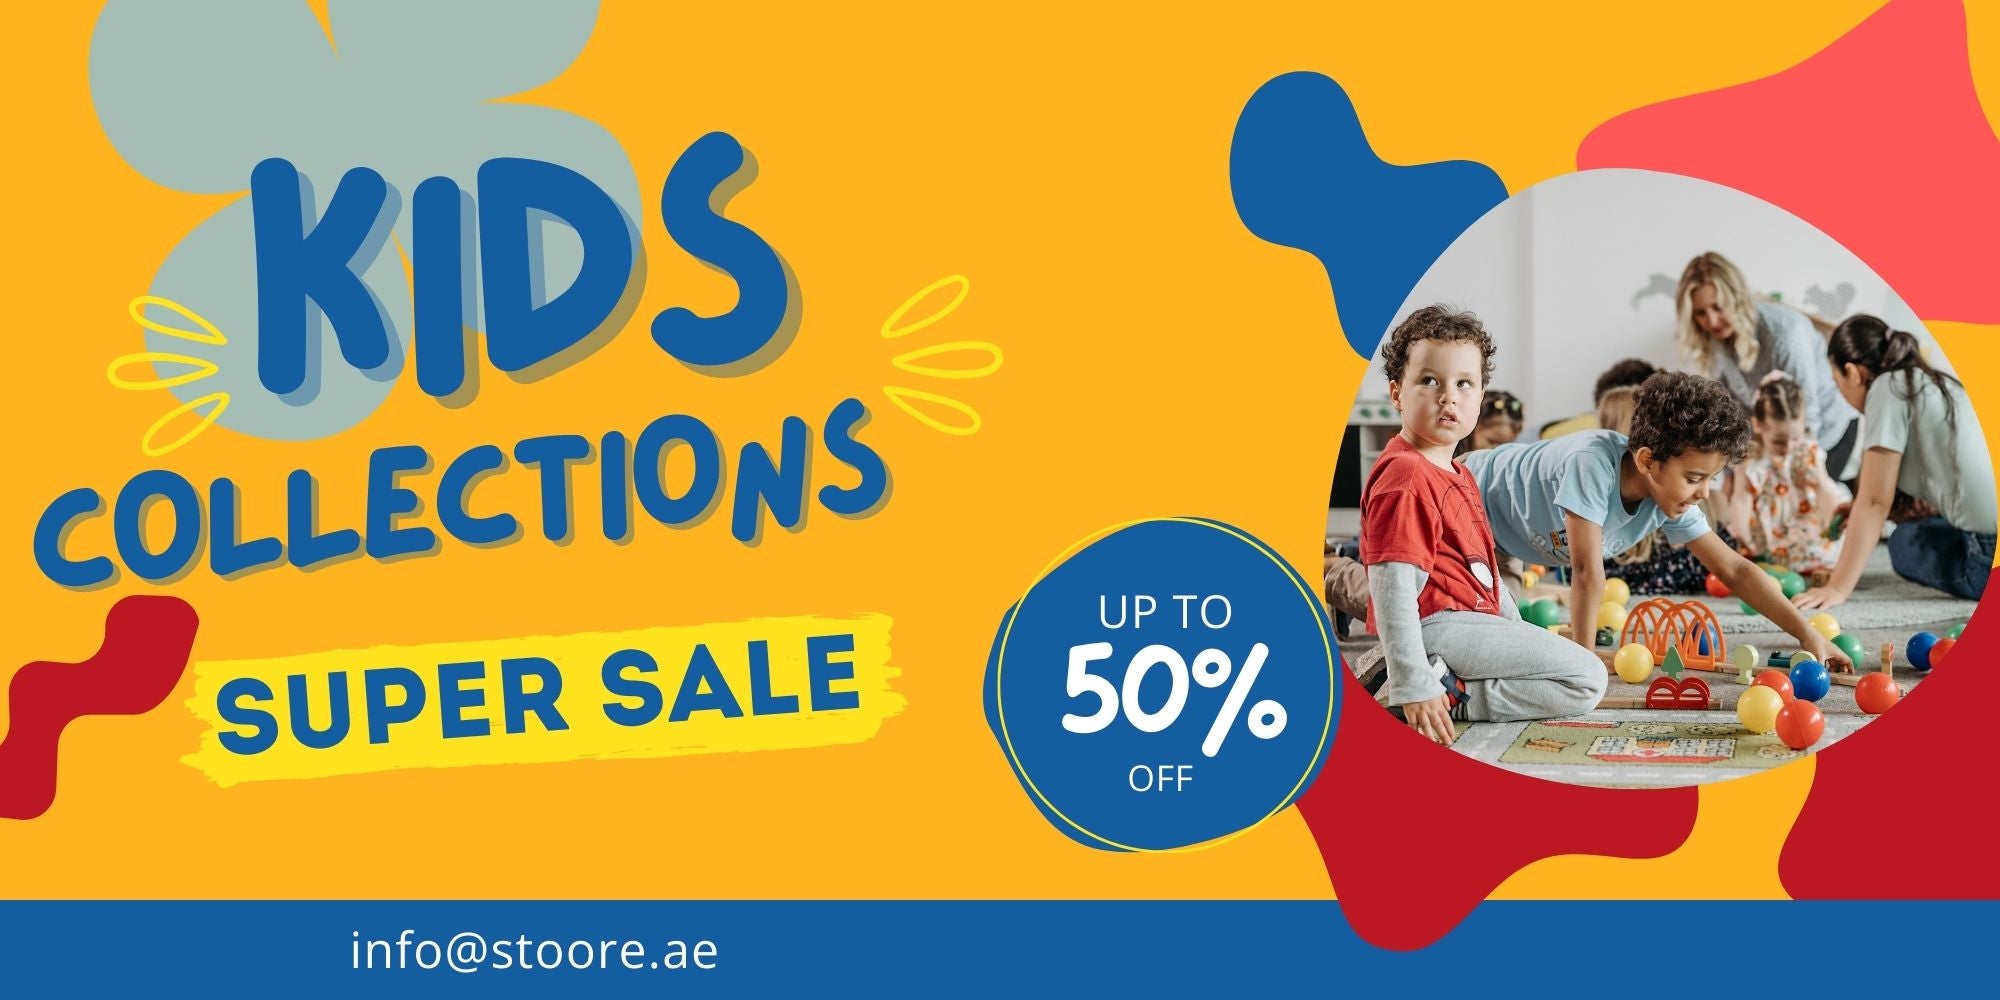 KIDS COLLECTIONS